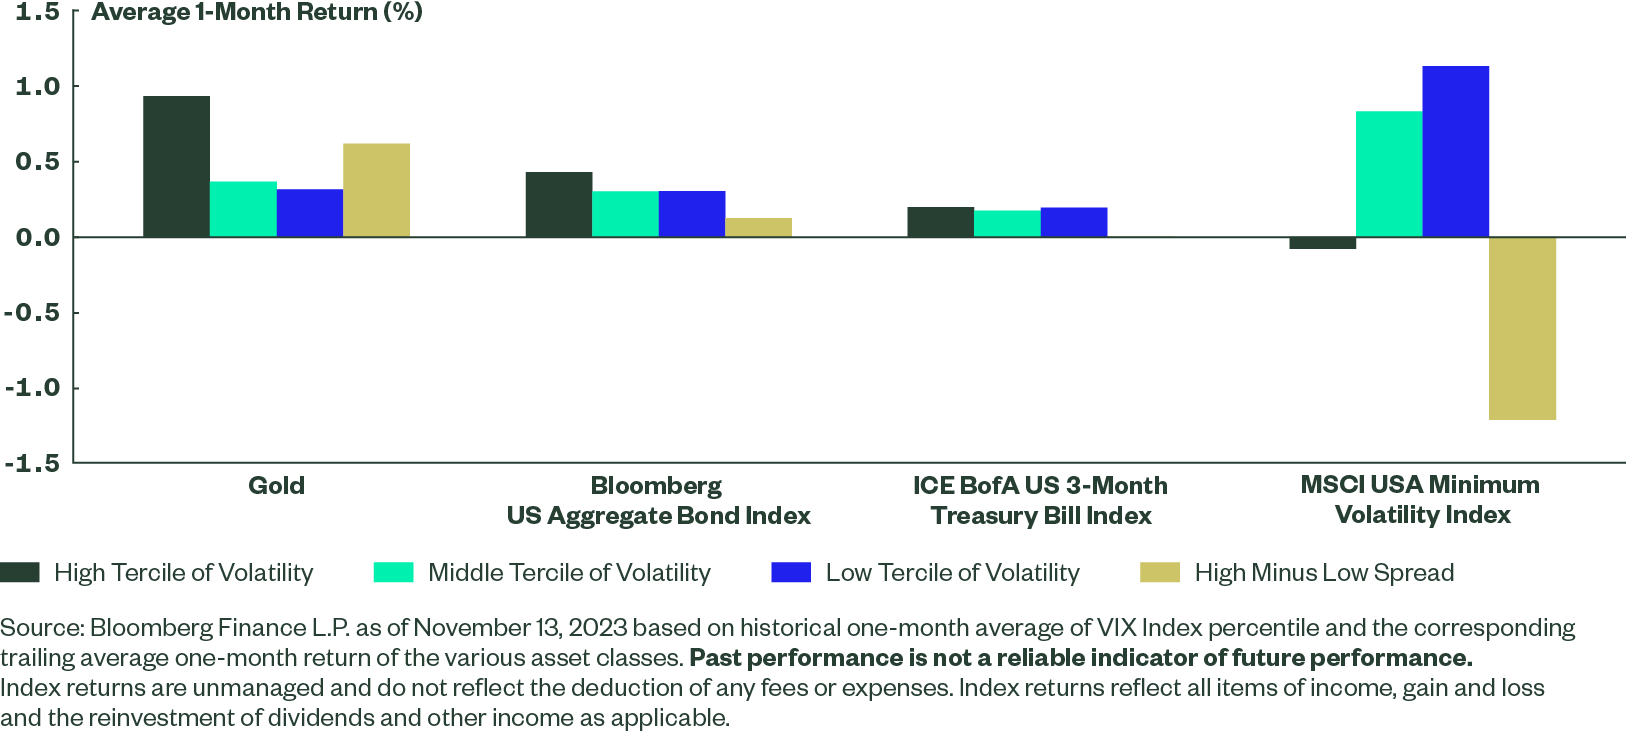 Figure 4: Gold Has Shined During Periods of High Volatility